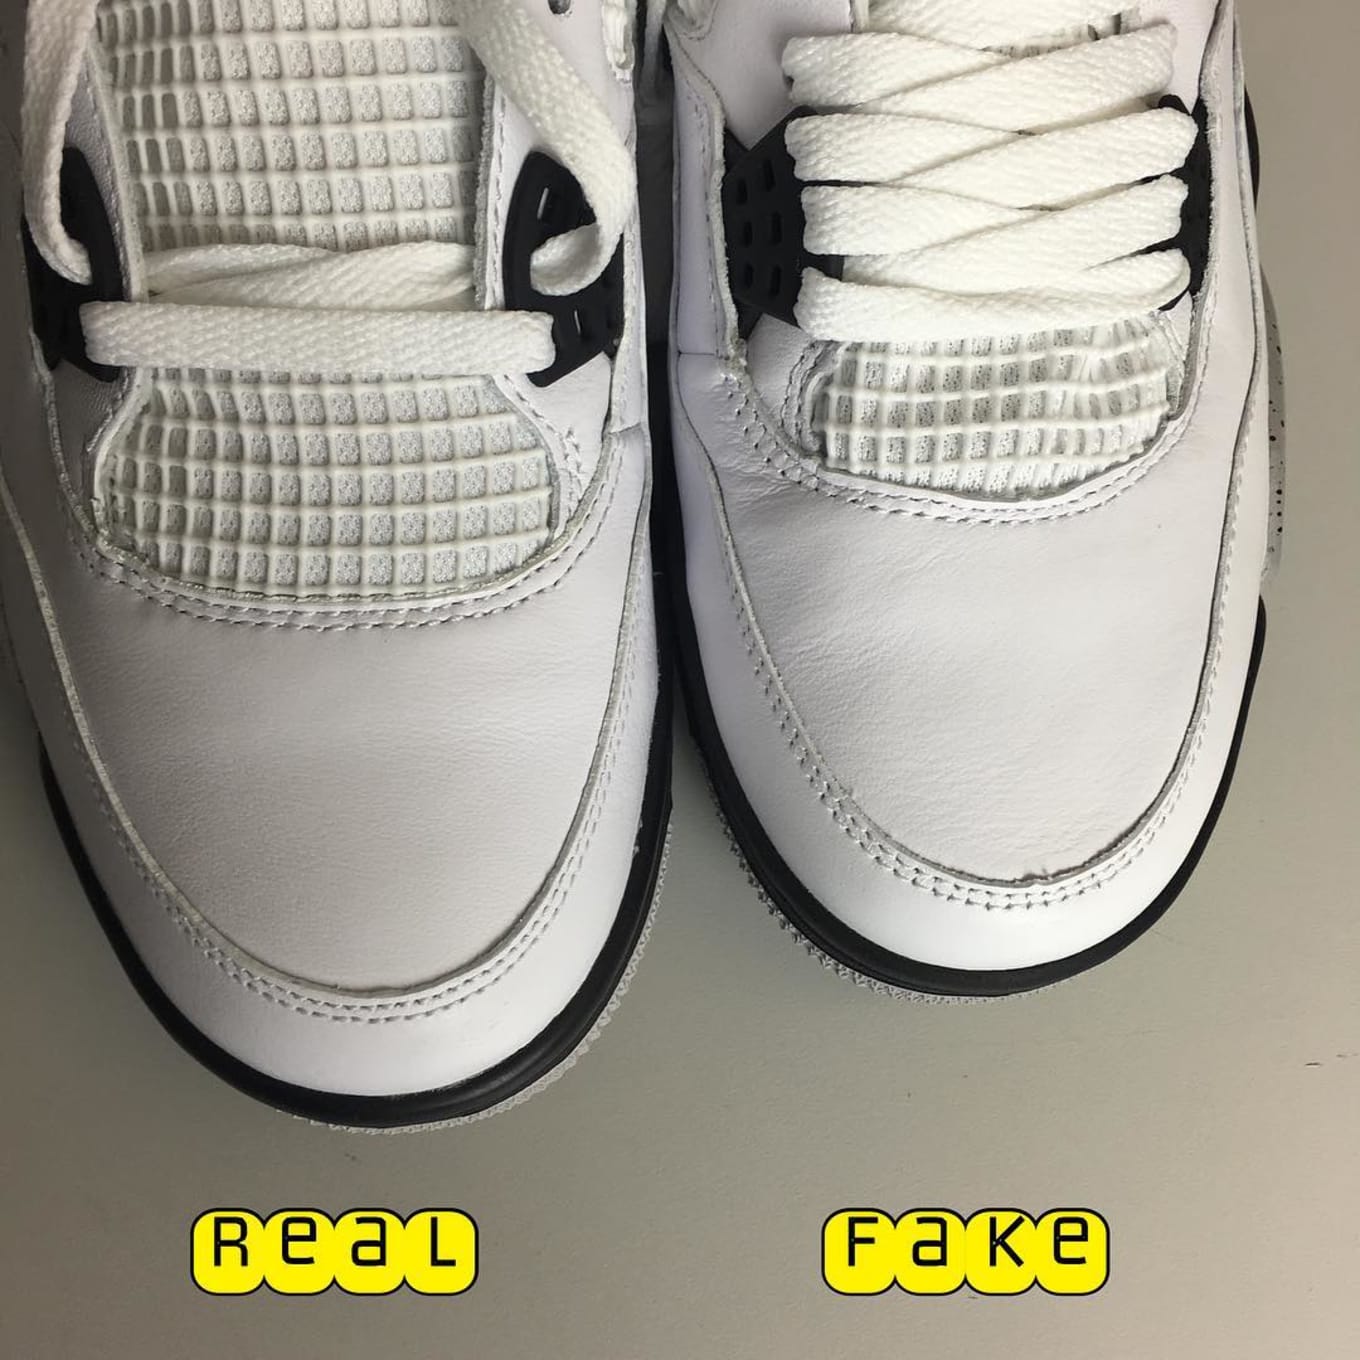 how to check if jordan 4 are real